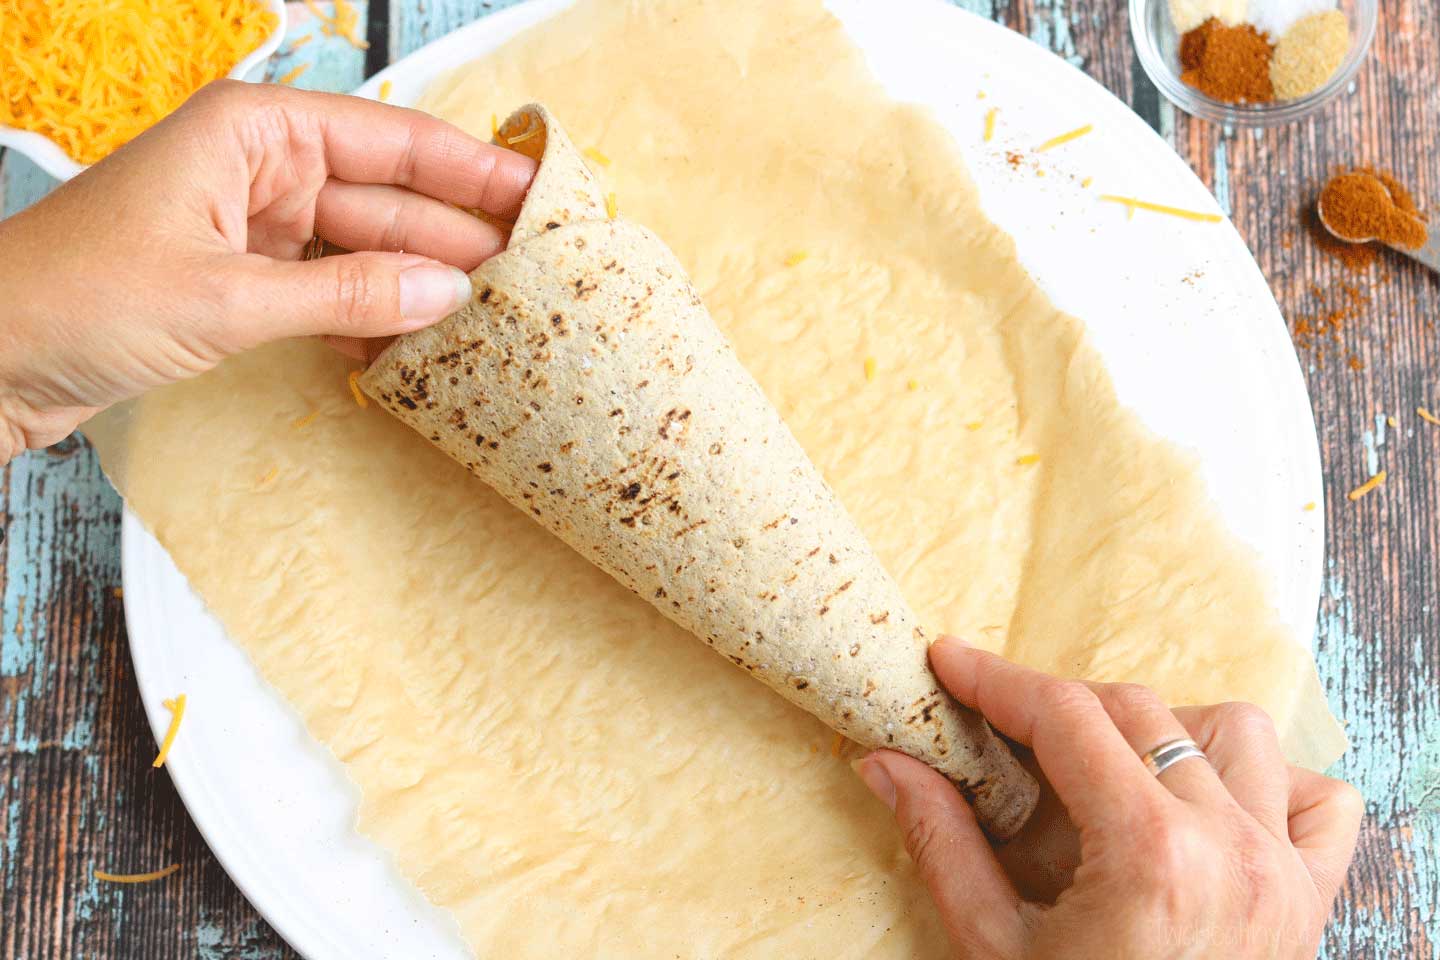 After you microwave the flatbread, roll it into a cone shape and press gently around the edges to seal.